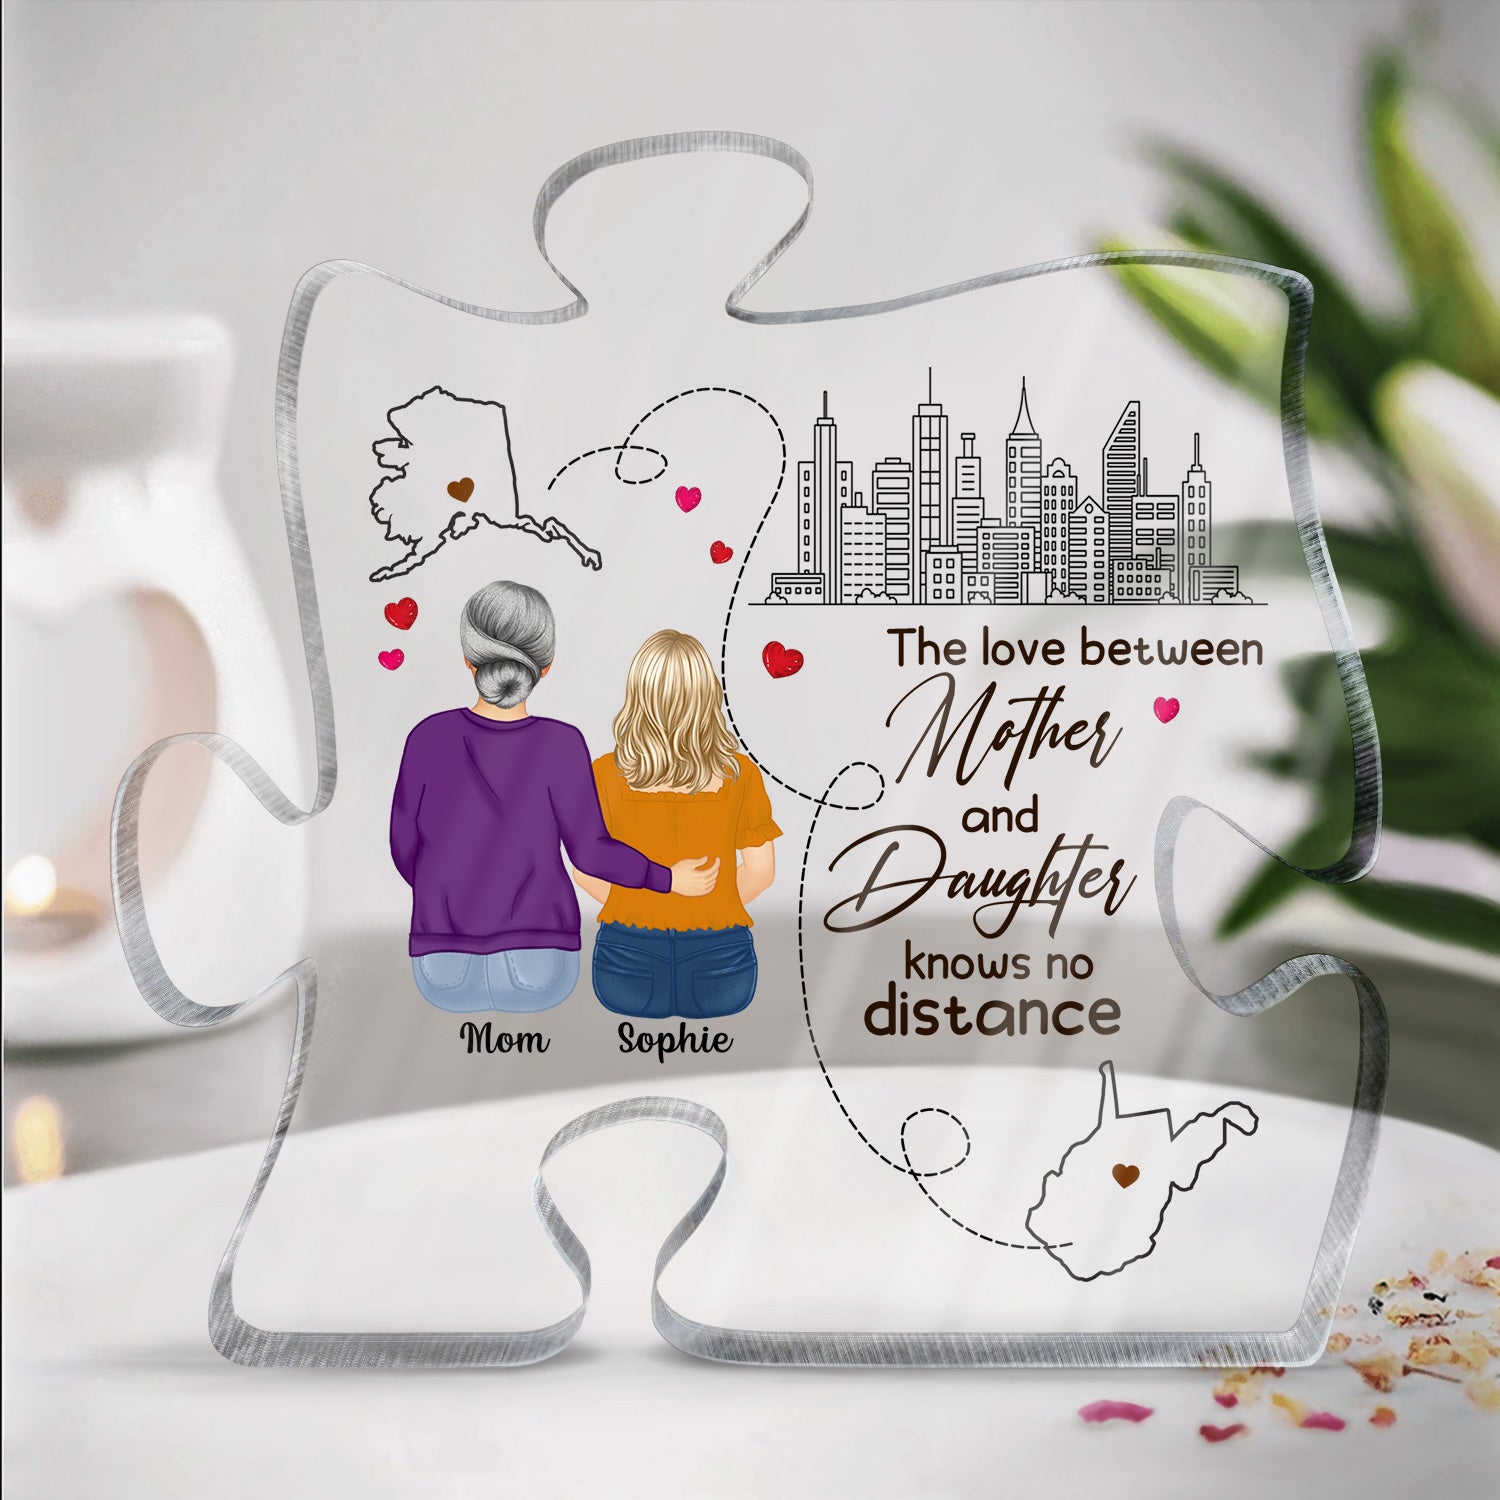 Know No Distance - Gift For Mother, Daughter - Personalized Puzzle Shaped Acrylic Plaque